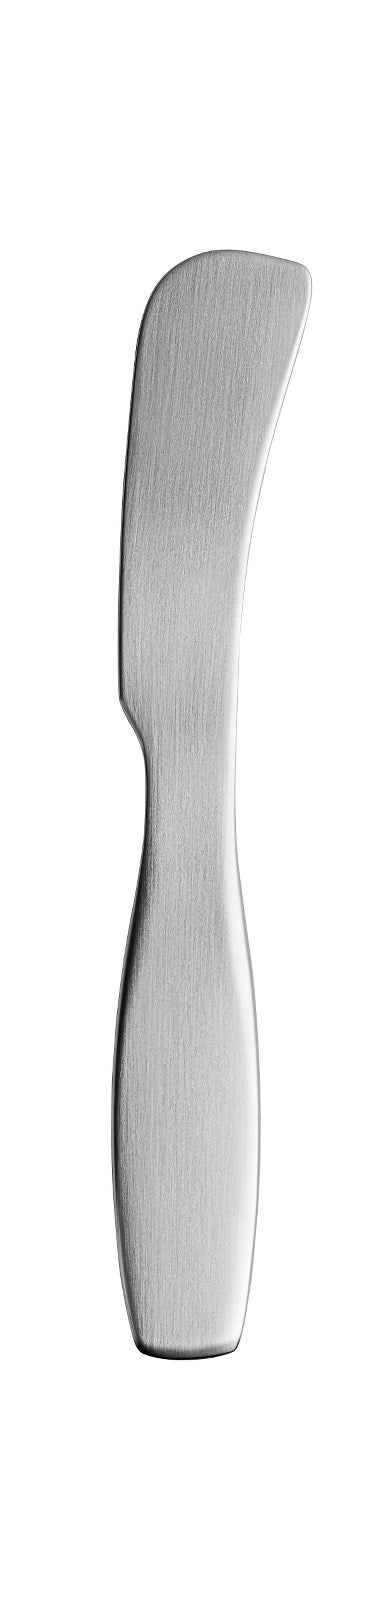 product image for Collective Tools Flatware design by Antonio Citterio for Iittala 86